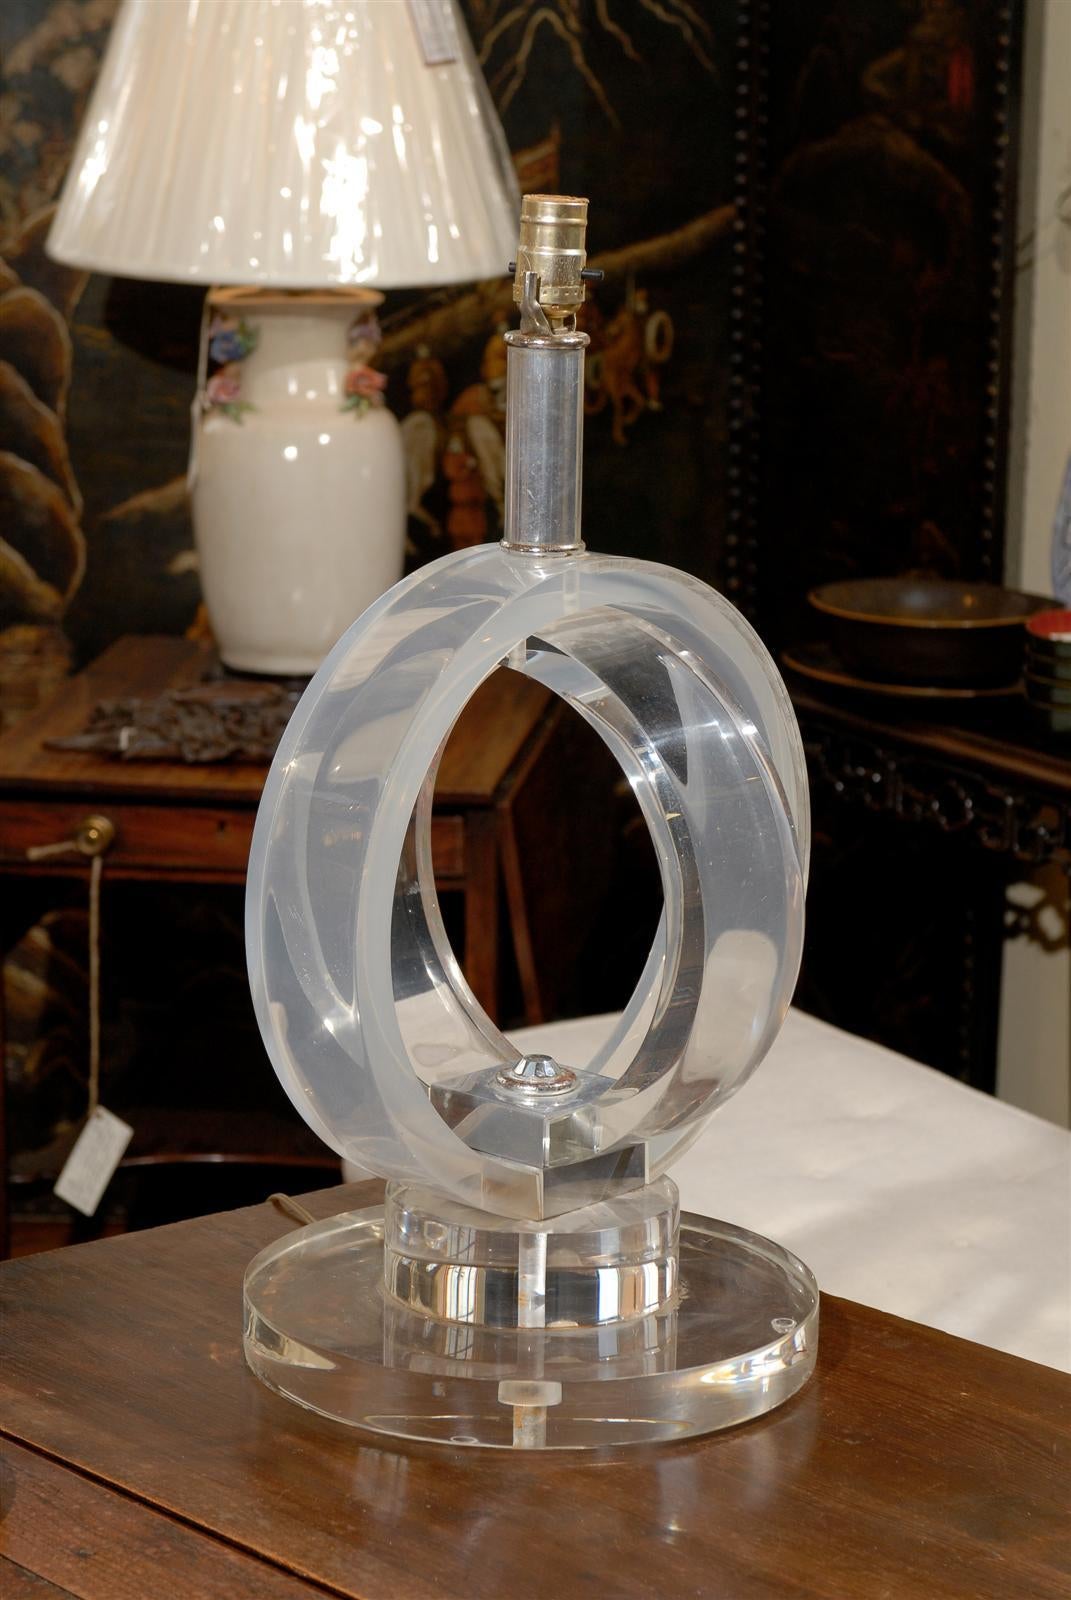 Midcentury table lamp of thick and heavy lucite concentric rings, one clear and the other frosted, on a substancial two tiered lucite base and having chrome fittings.